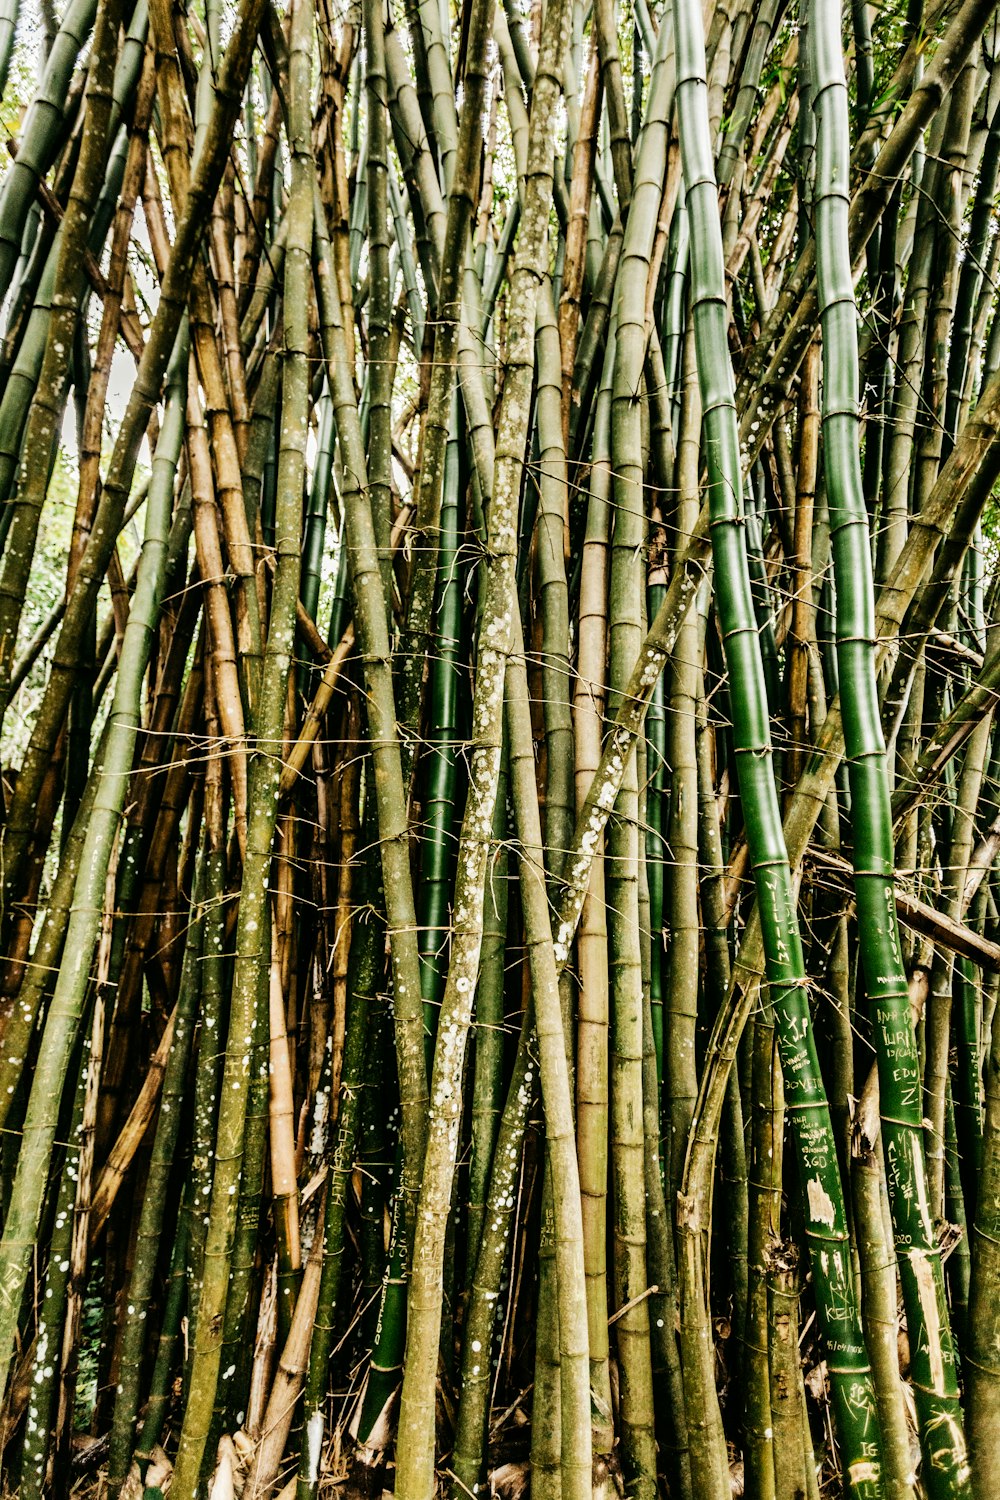 brown and green bamboo sticks